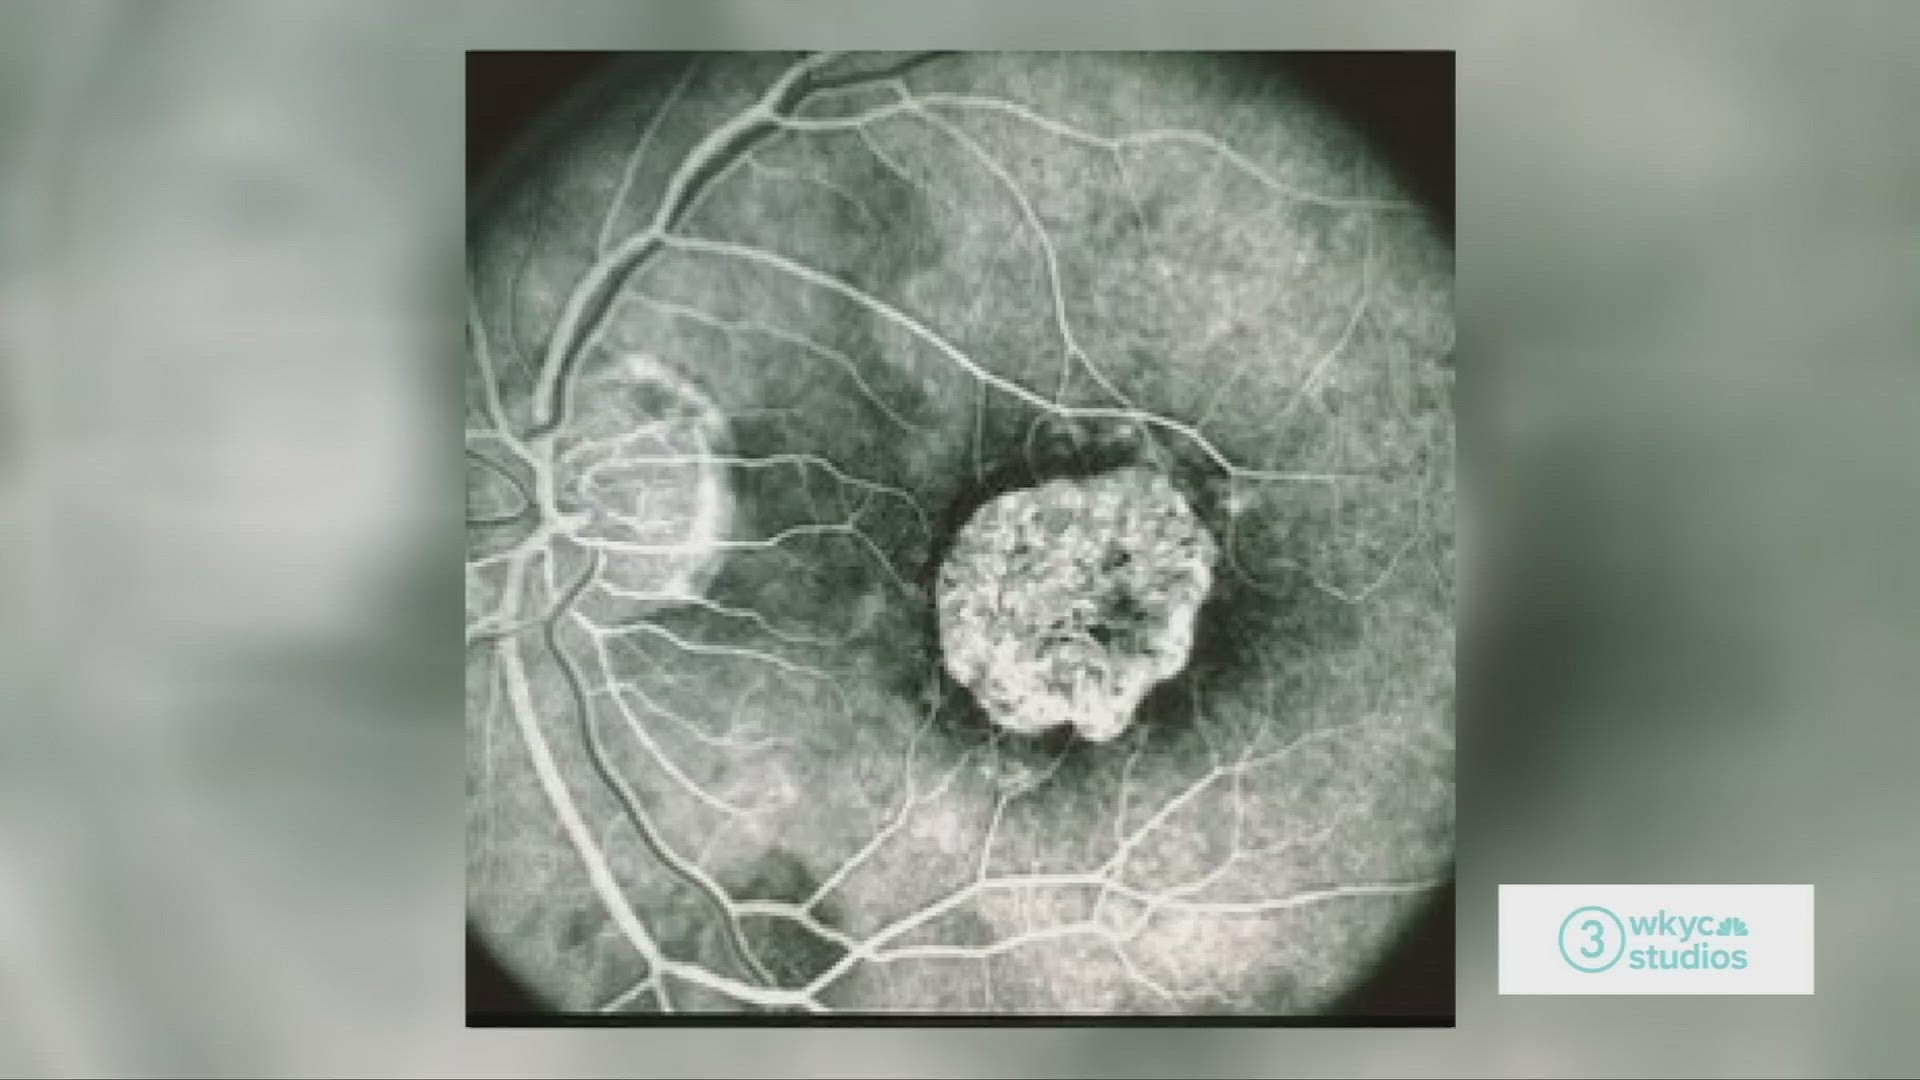 Hollie speaks with Dr. Suber Huang from the Retina Center of Ohio and Future Vision Foundation about macular degeneration, and how we can treat or prevent it.